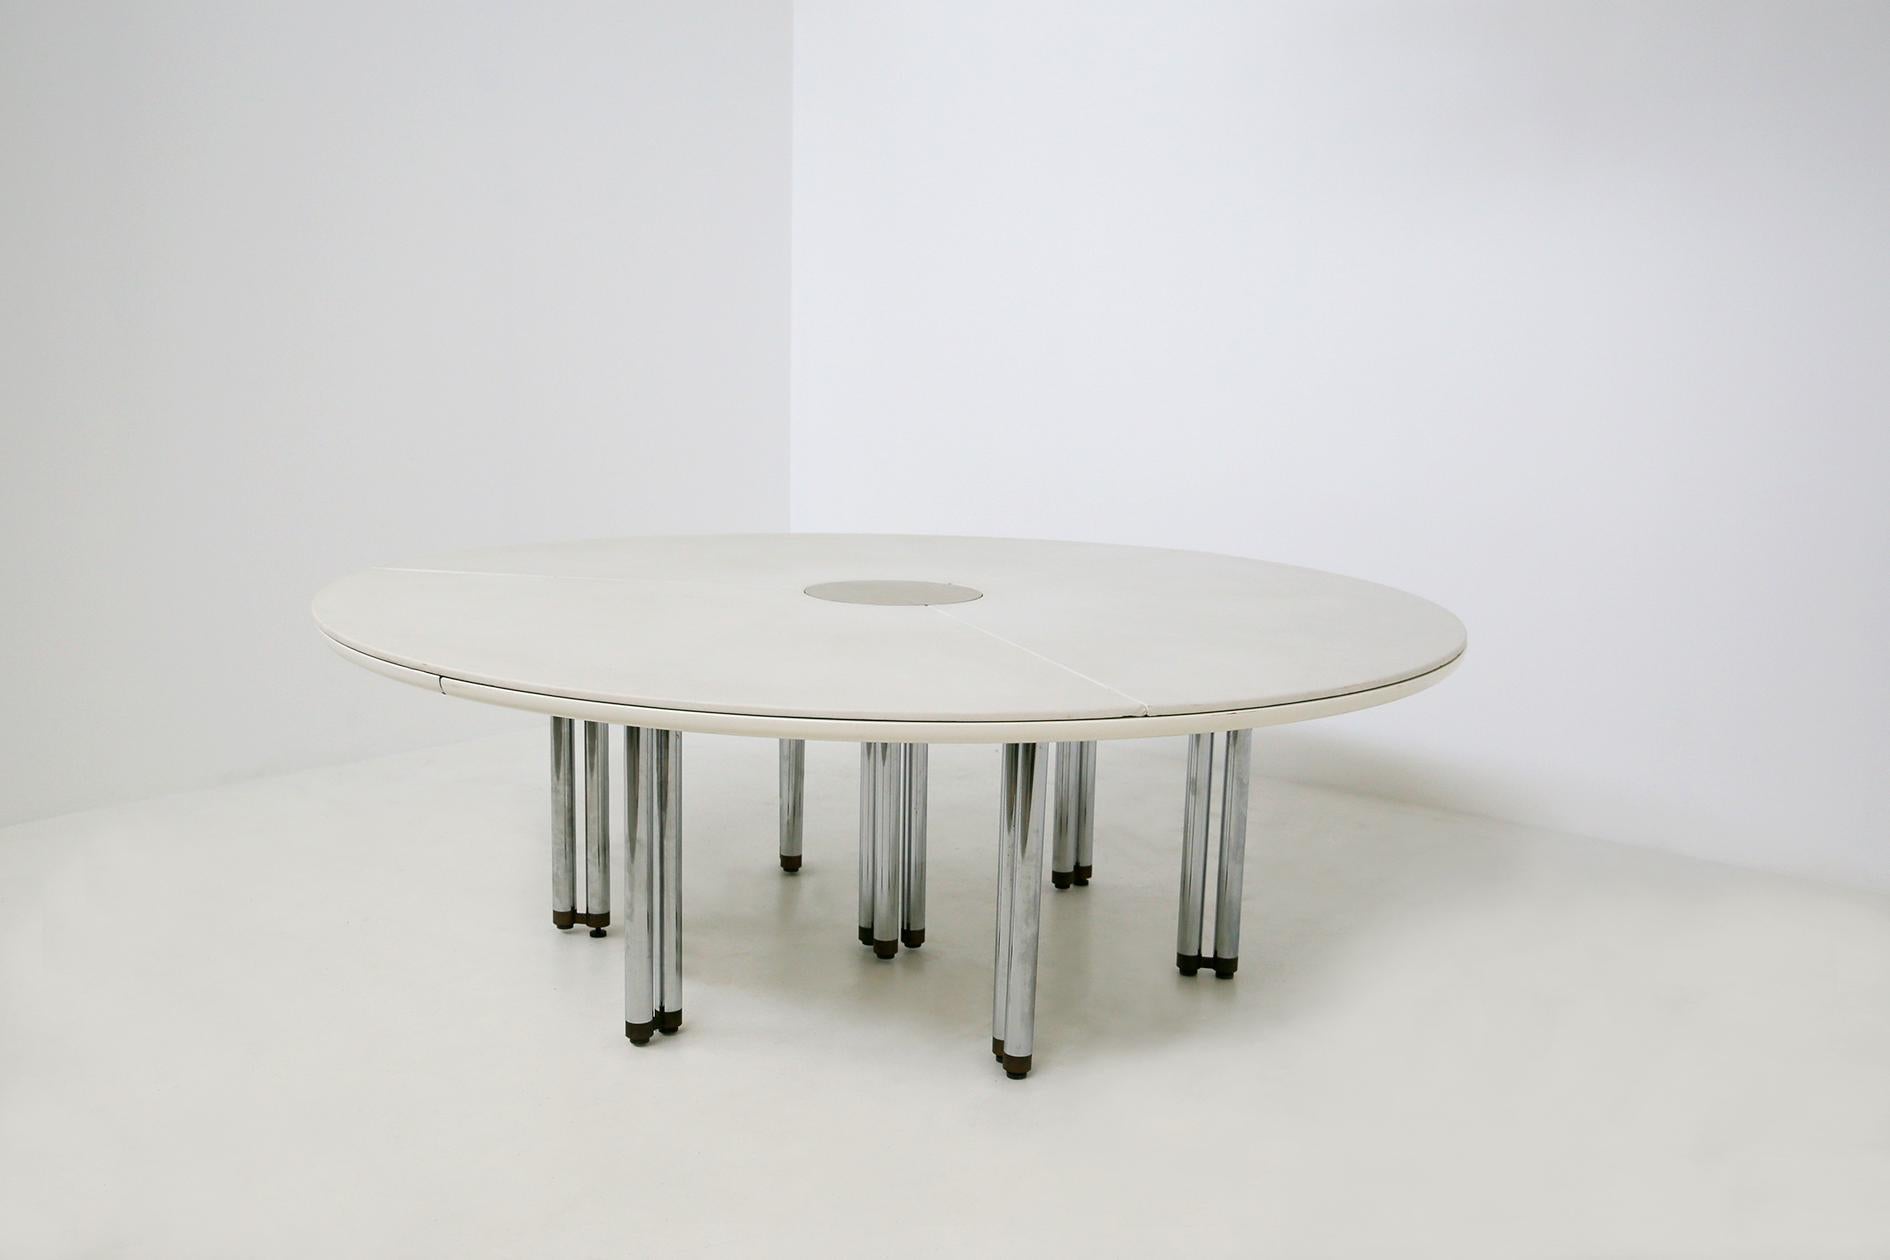 Hiroyuki Toyoda large white table from the series 